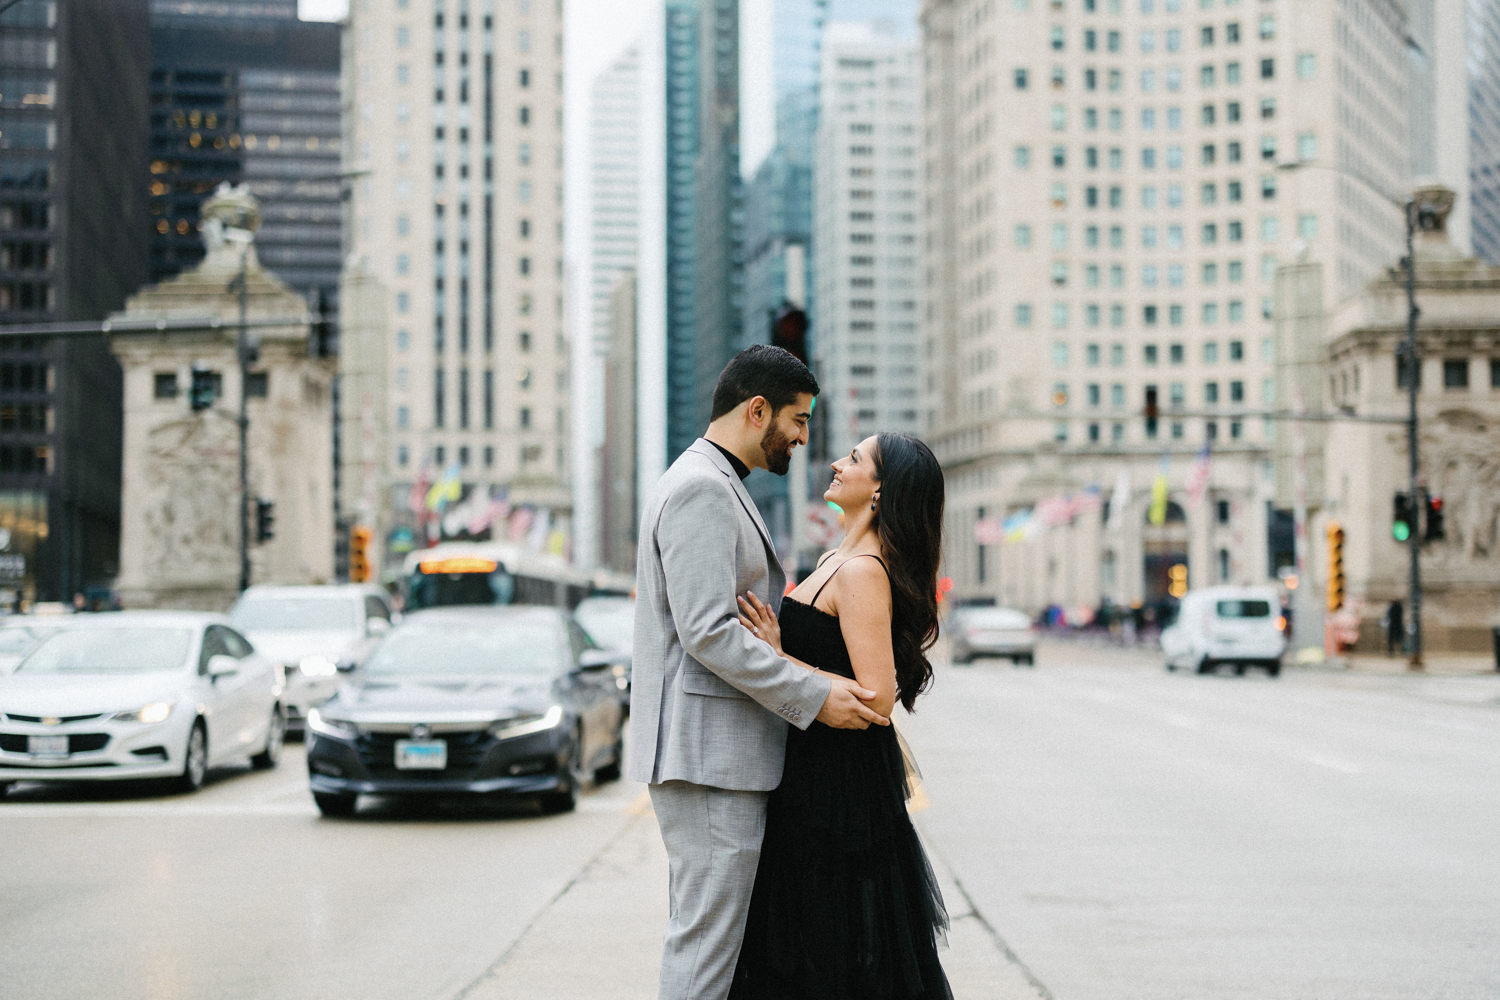 Michigan Avenue Engagement Photo in Downtown Chicago